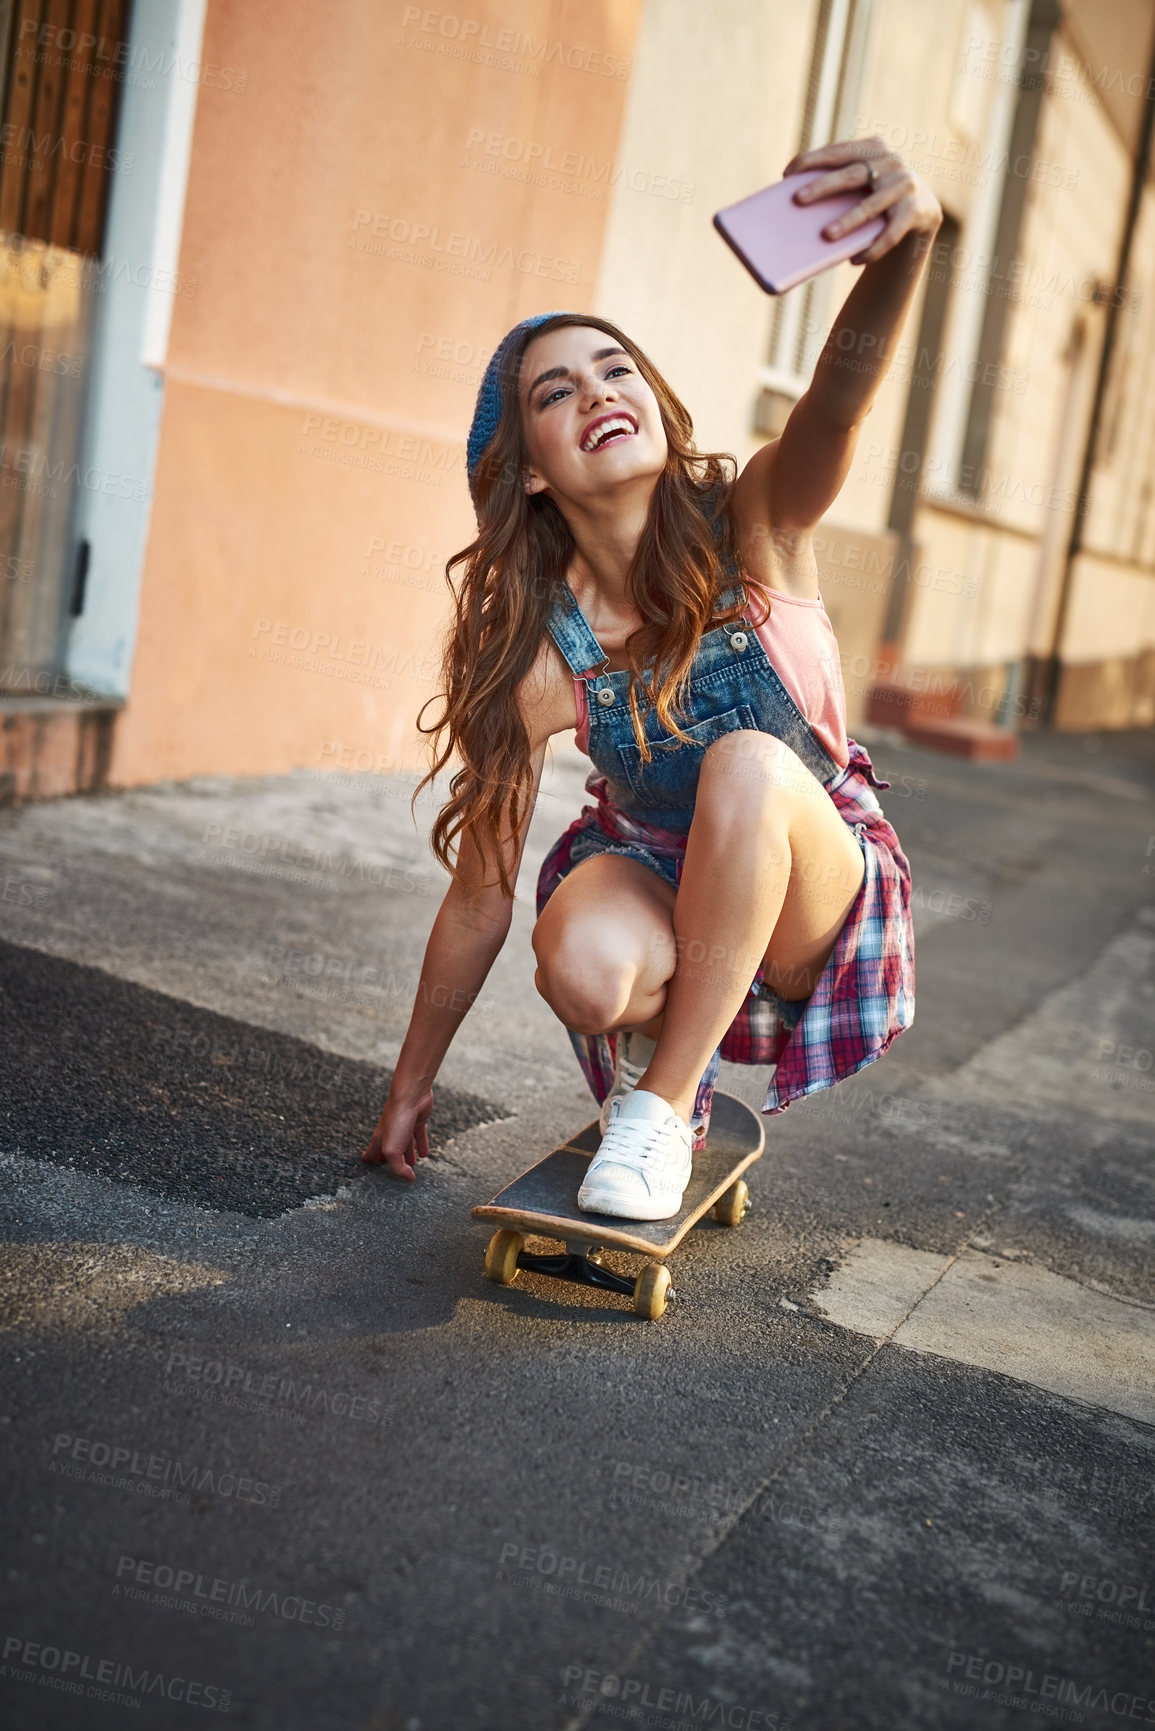 Buy stock photo Shot of a carefree young woman riding low on a skateboard while taking a self portrait with her cellphone outside during the day